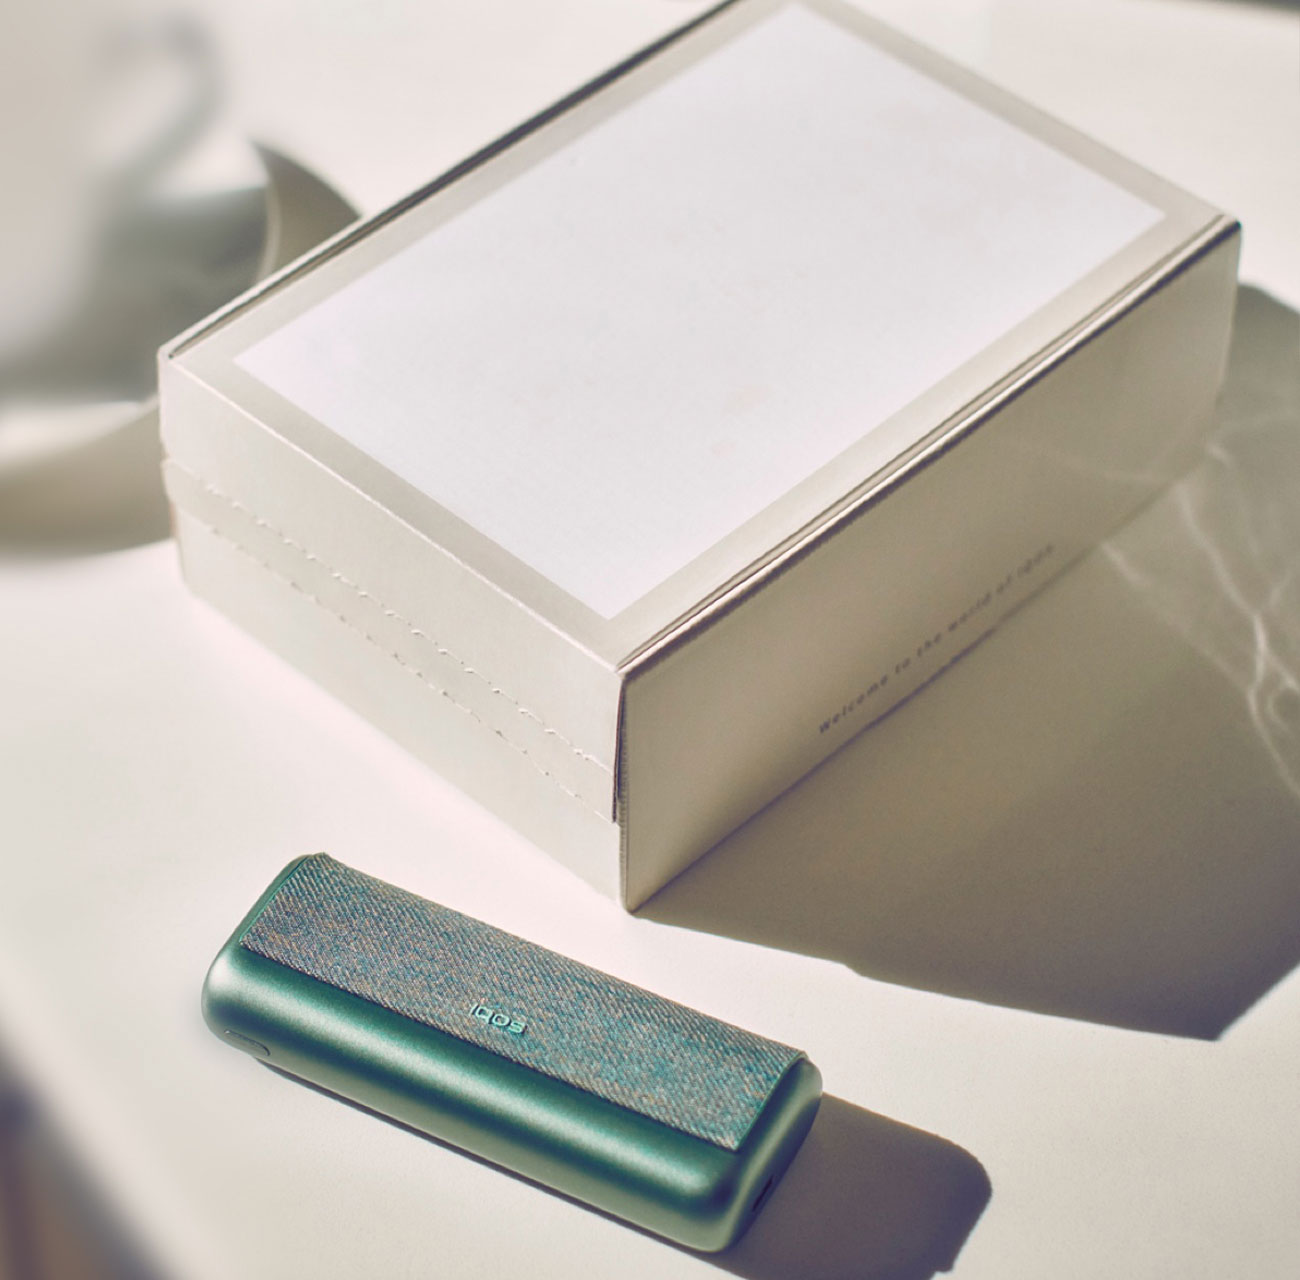 A jade green IQOS device on a table next to an IQOS product box.